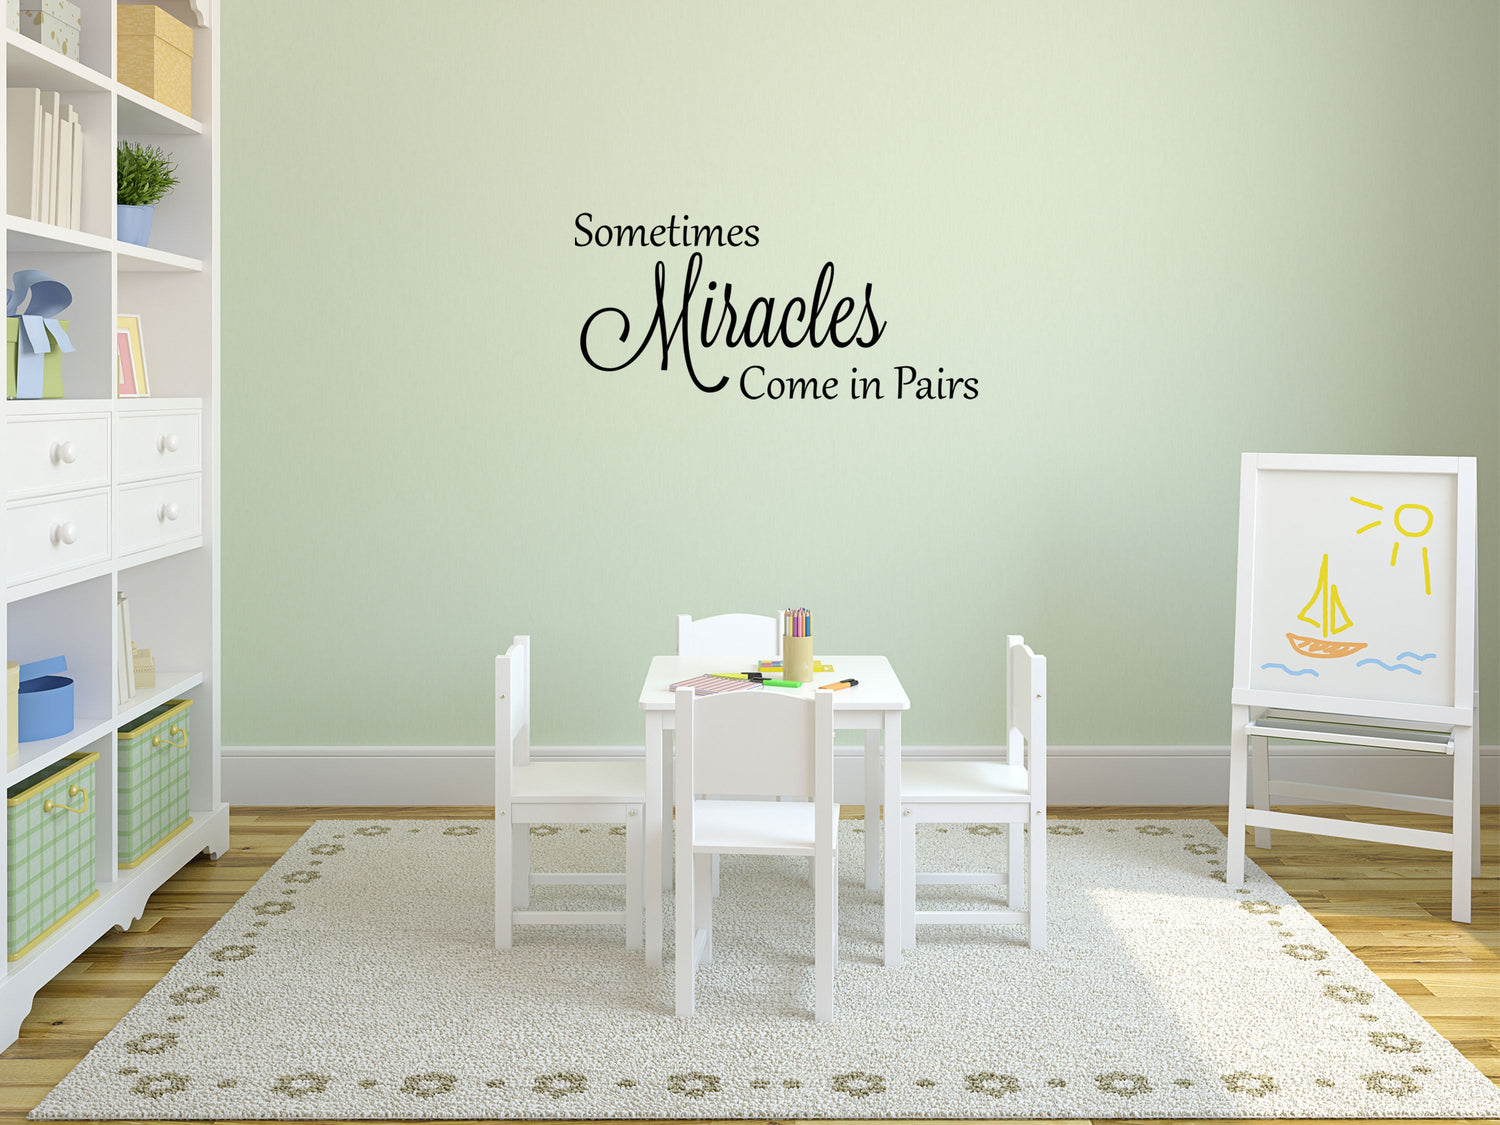 Sometimes Miracles Come In Pairs Vinyl Wall Decal - Twins Baby Gift - Twins Wall Quote - Twins Vinyl Wall Art - Vinyl Decals Twins Decal Vinyl Wall Decal Inspirational Wall Signs 